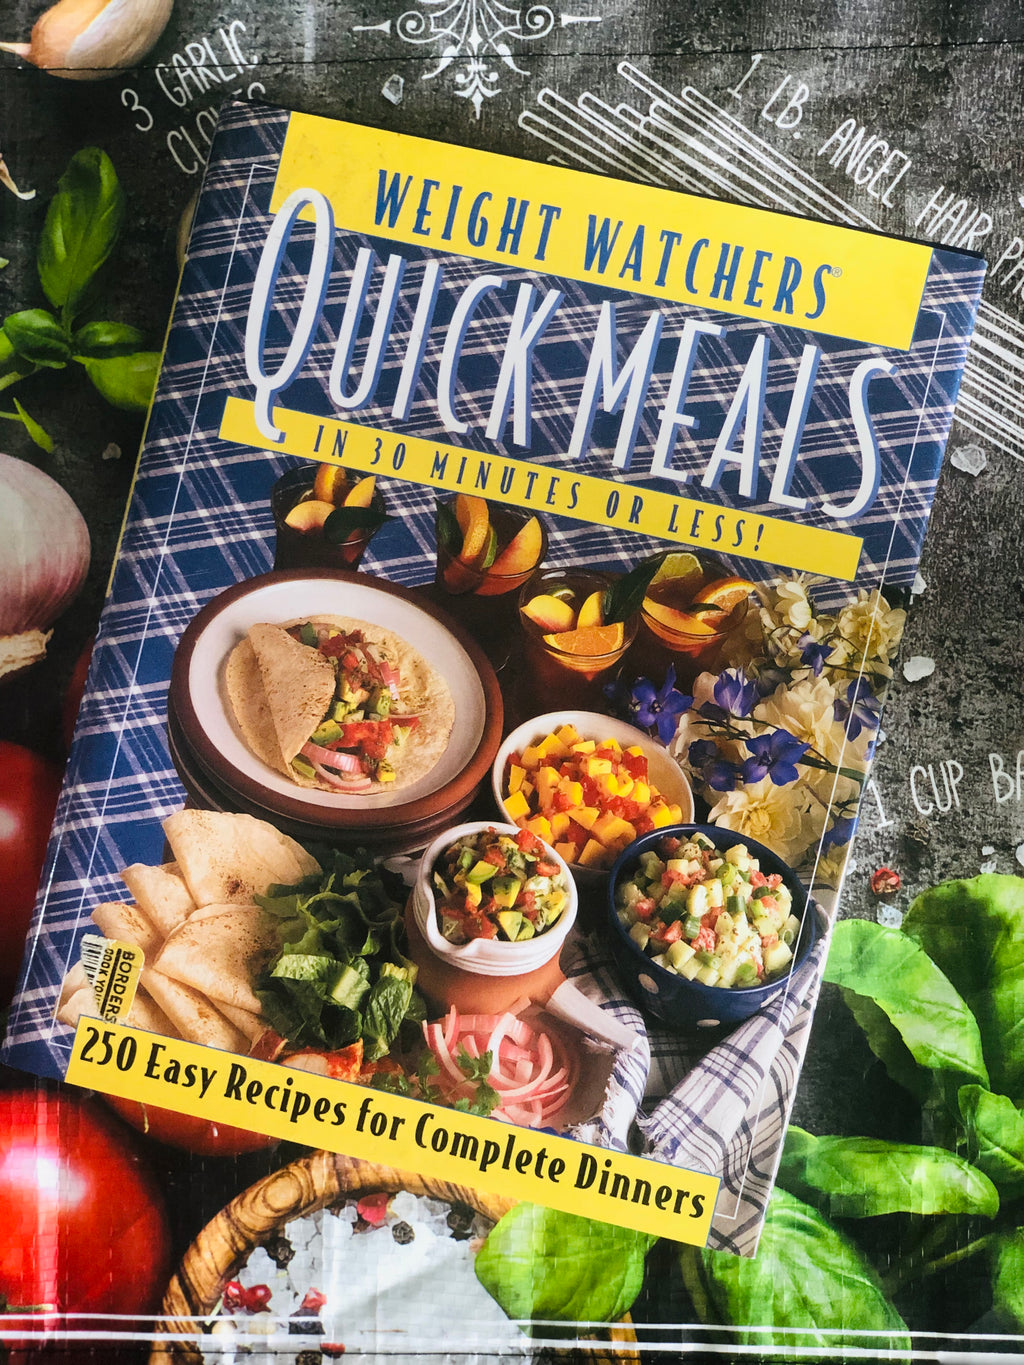 Weight Watchers: Quick Meals in 30 Minutes or Less